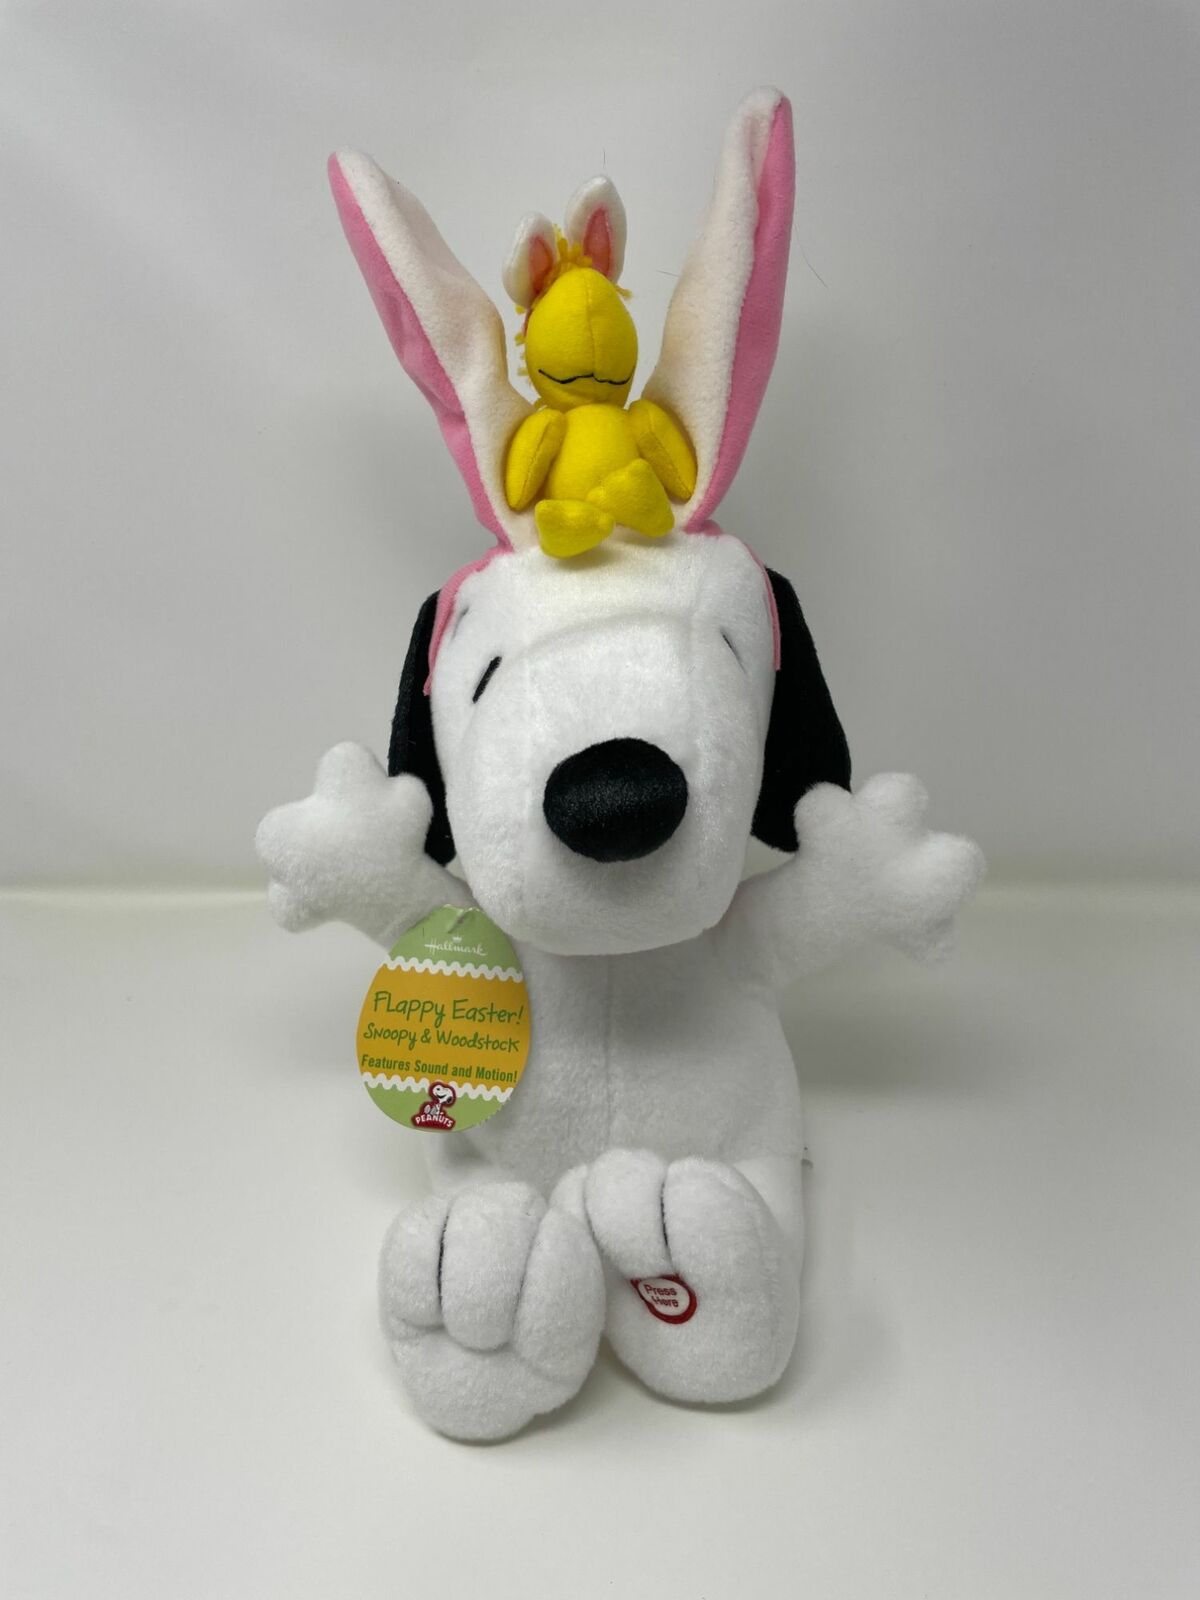 Hallmark Animated Plush Flappy Easter Snoopy And Woodstock New